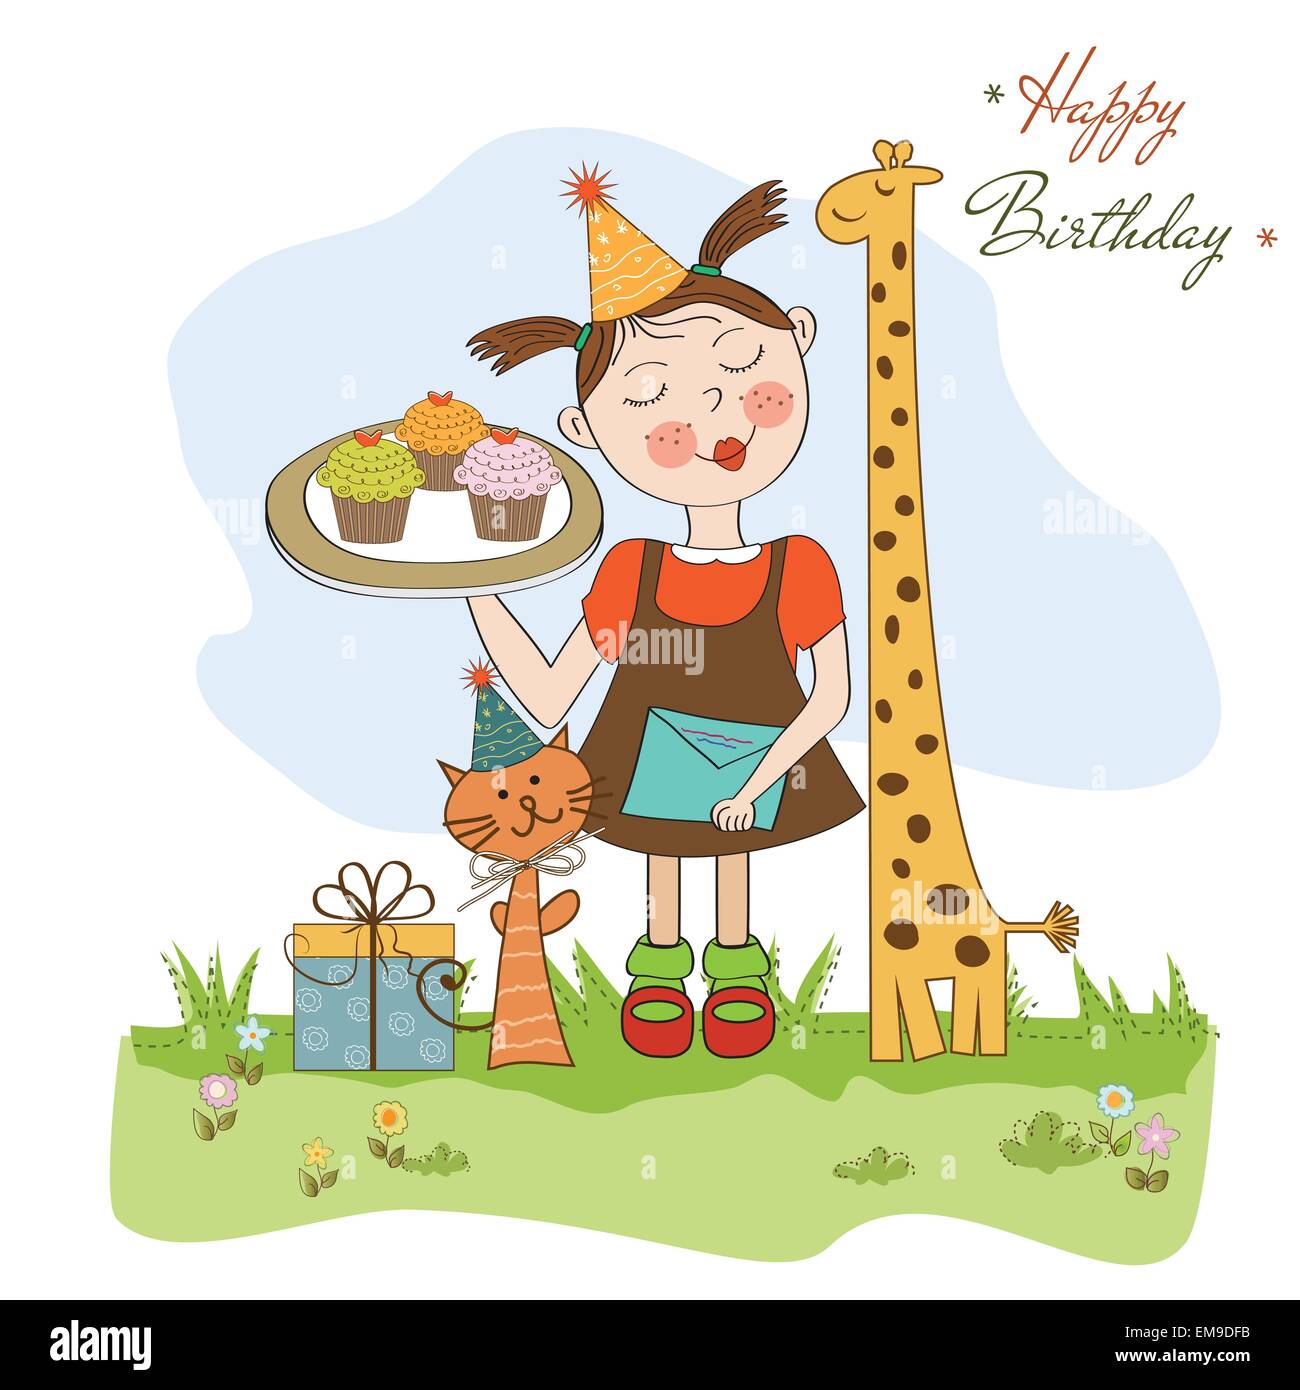 Happy Birthday card with funny girl, animals and cupcakes Stock Vector